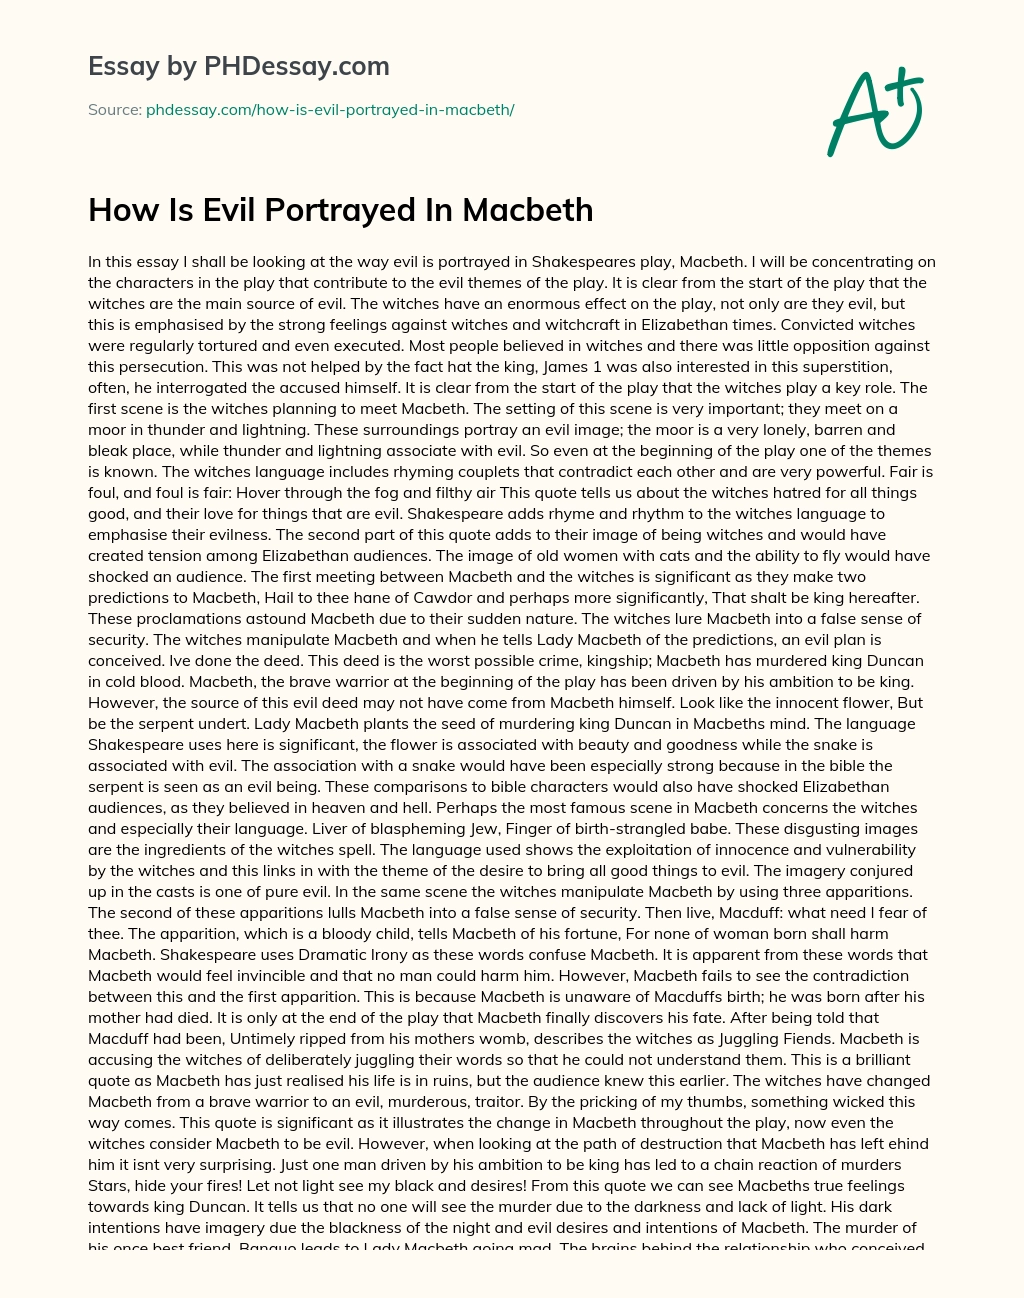 How Is Evil Portrayed In Macbeth essay